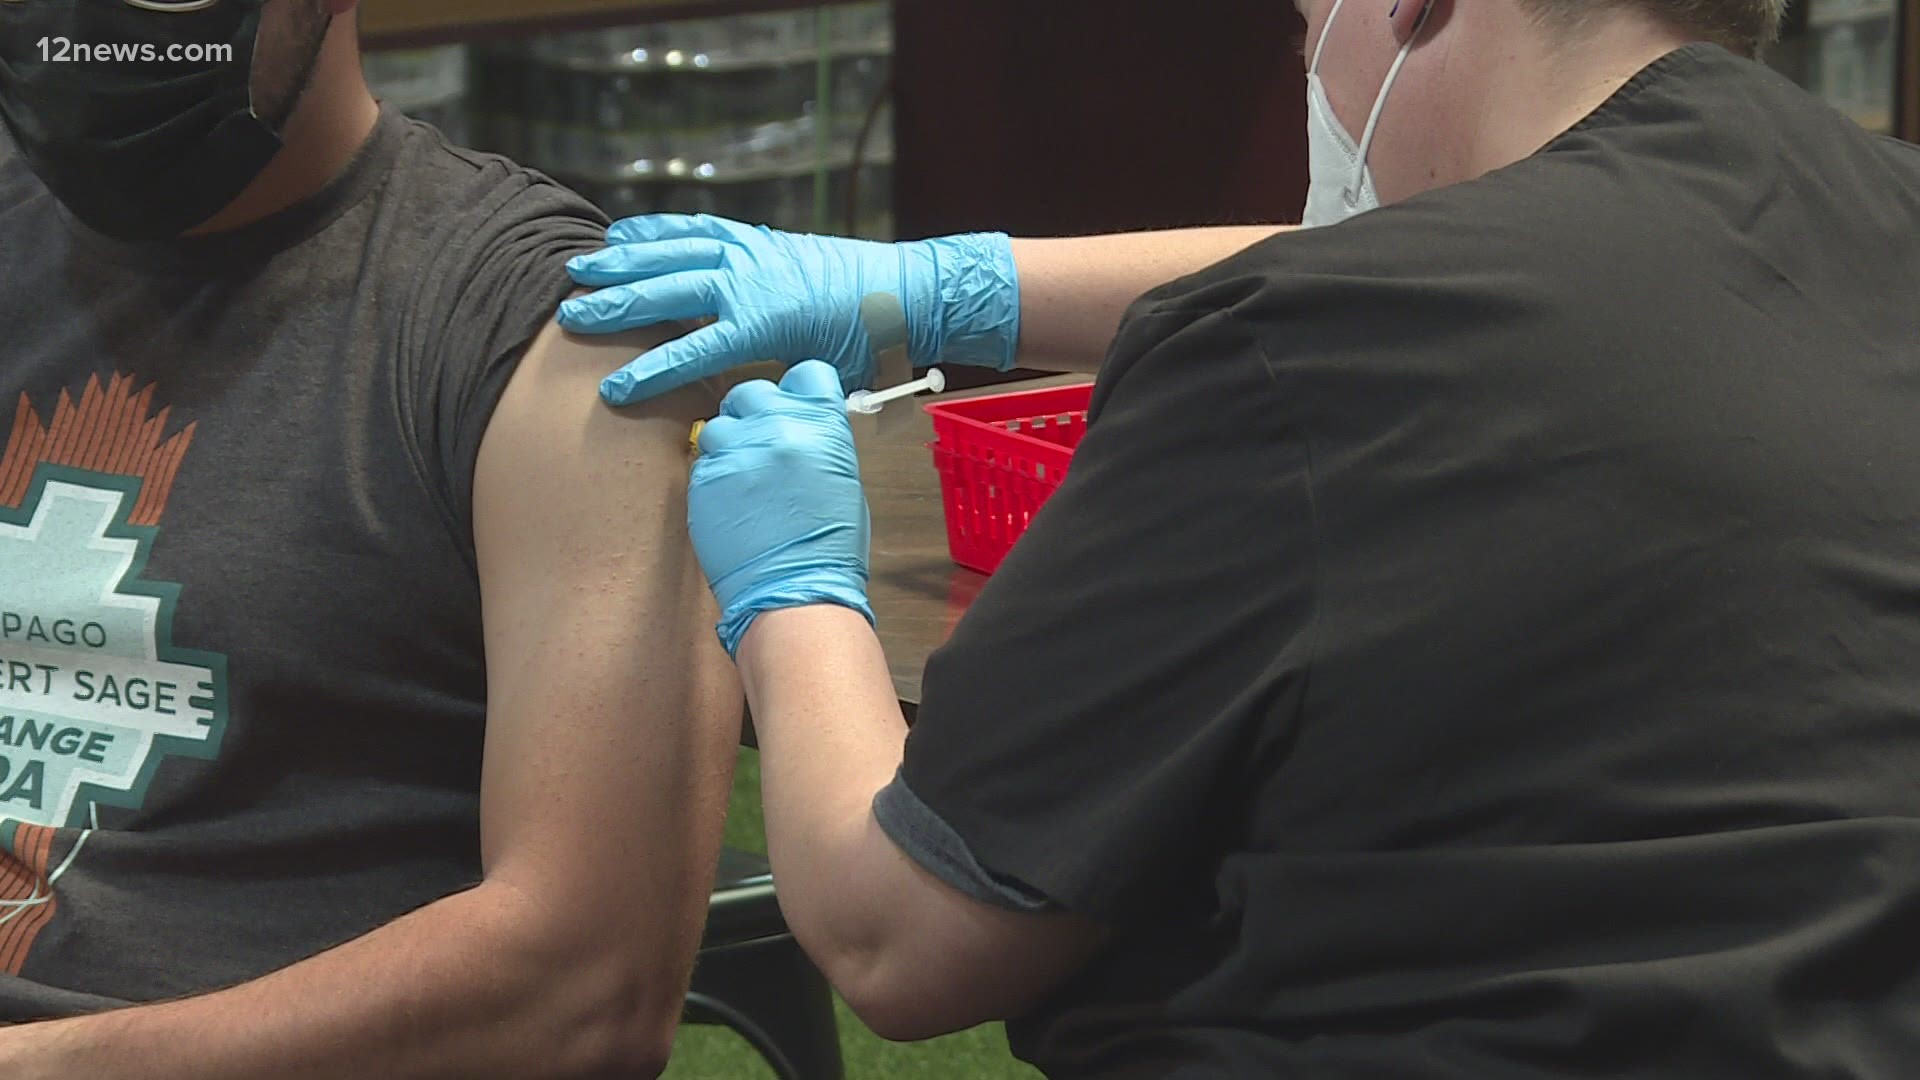 More than 2,000,000 people in Arizona have been vaccinated, but health officials are warning people to still be vigilant and not get too confident.